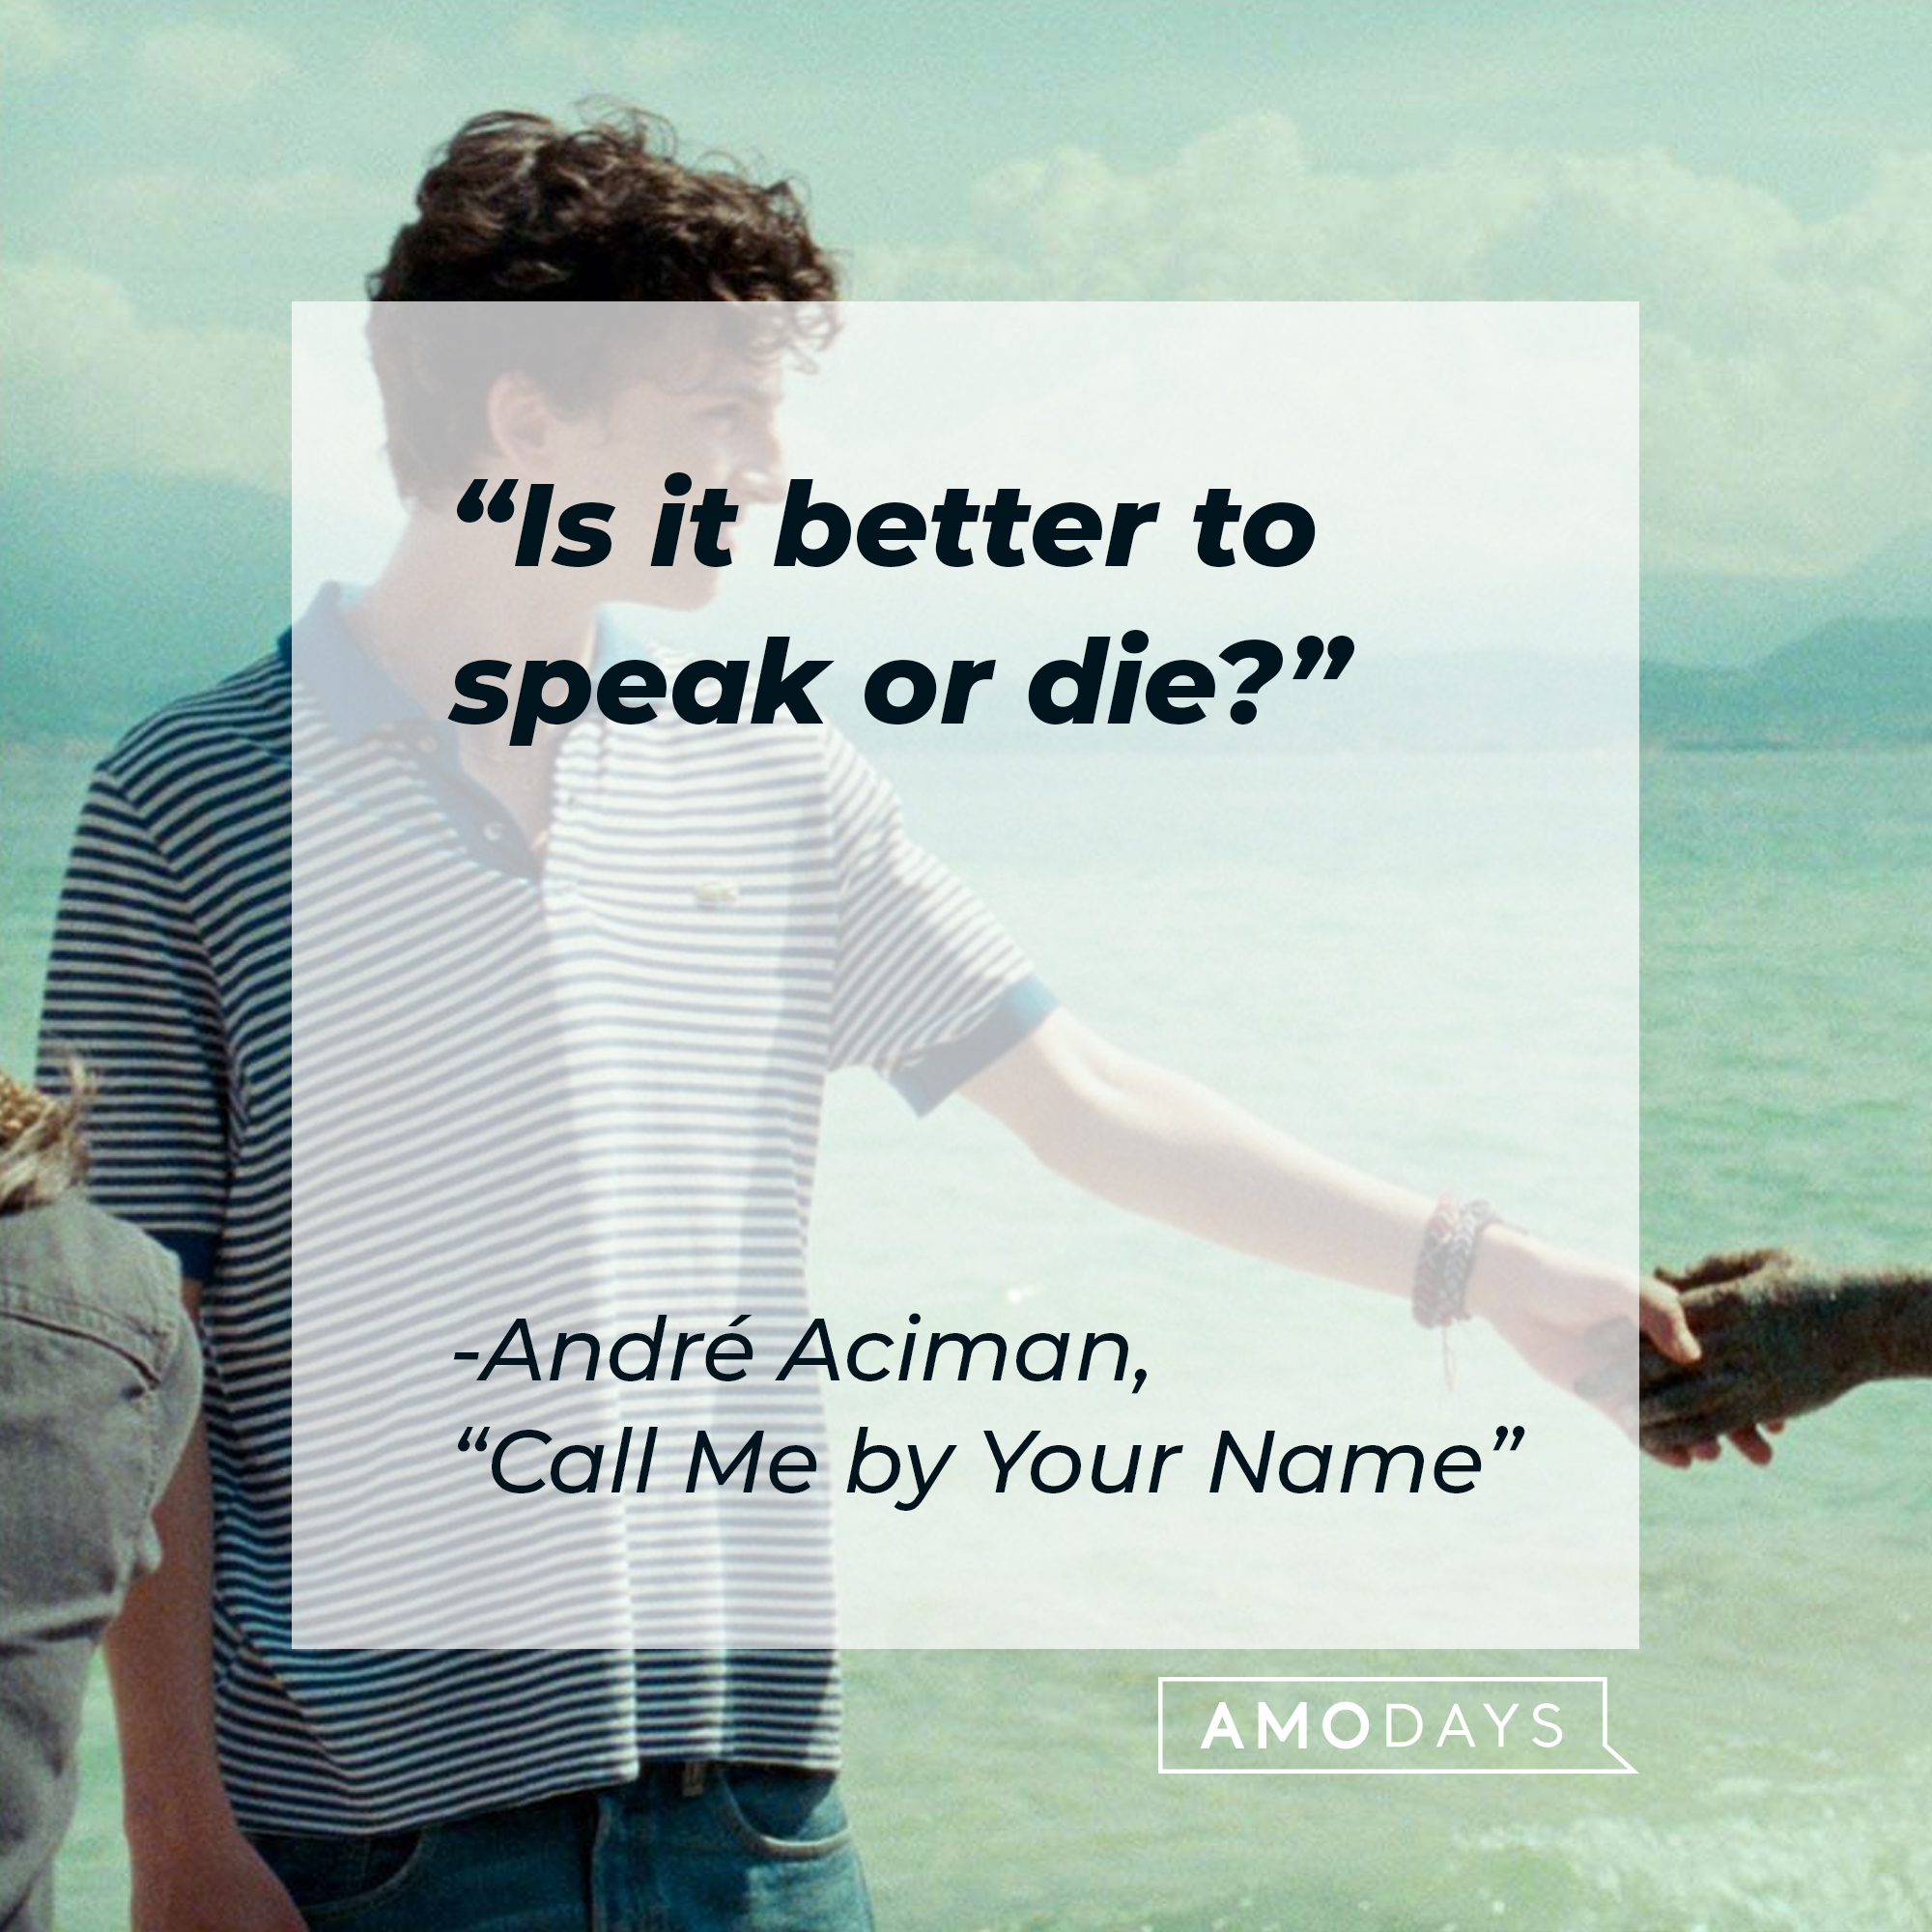 The character Elio from the film “Call Me By Your Name,” with a quote by the author, André Aciman, from the book it’s based on: “Is it better to speak or die?” | Source: Facebook.com/CallMeByYourNameFilm